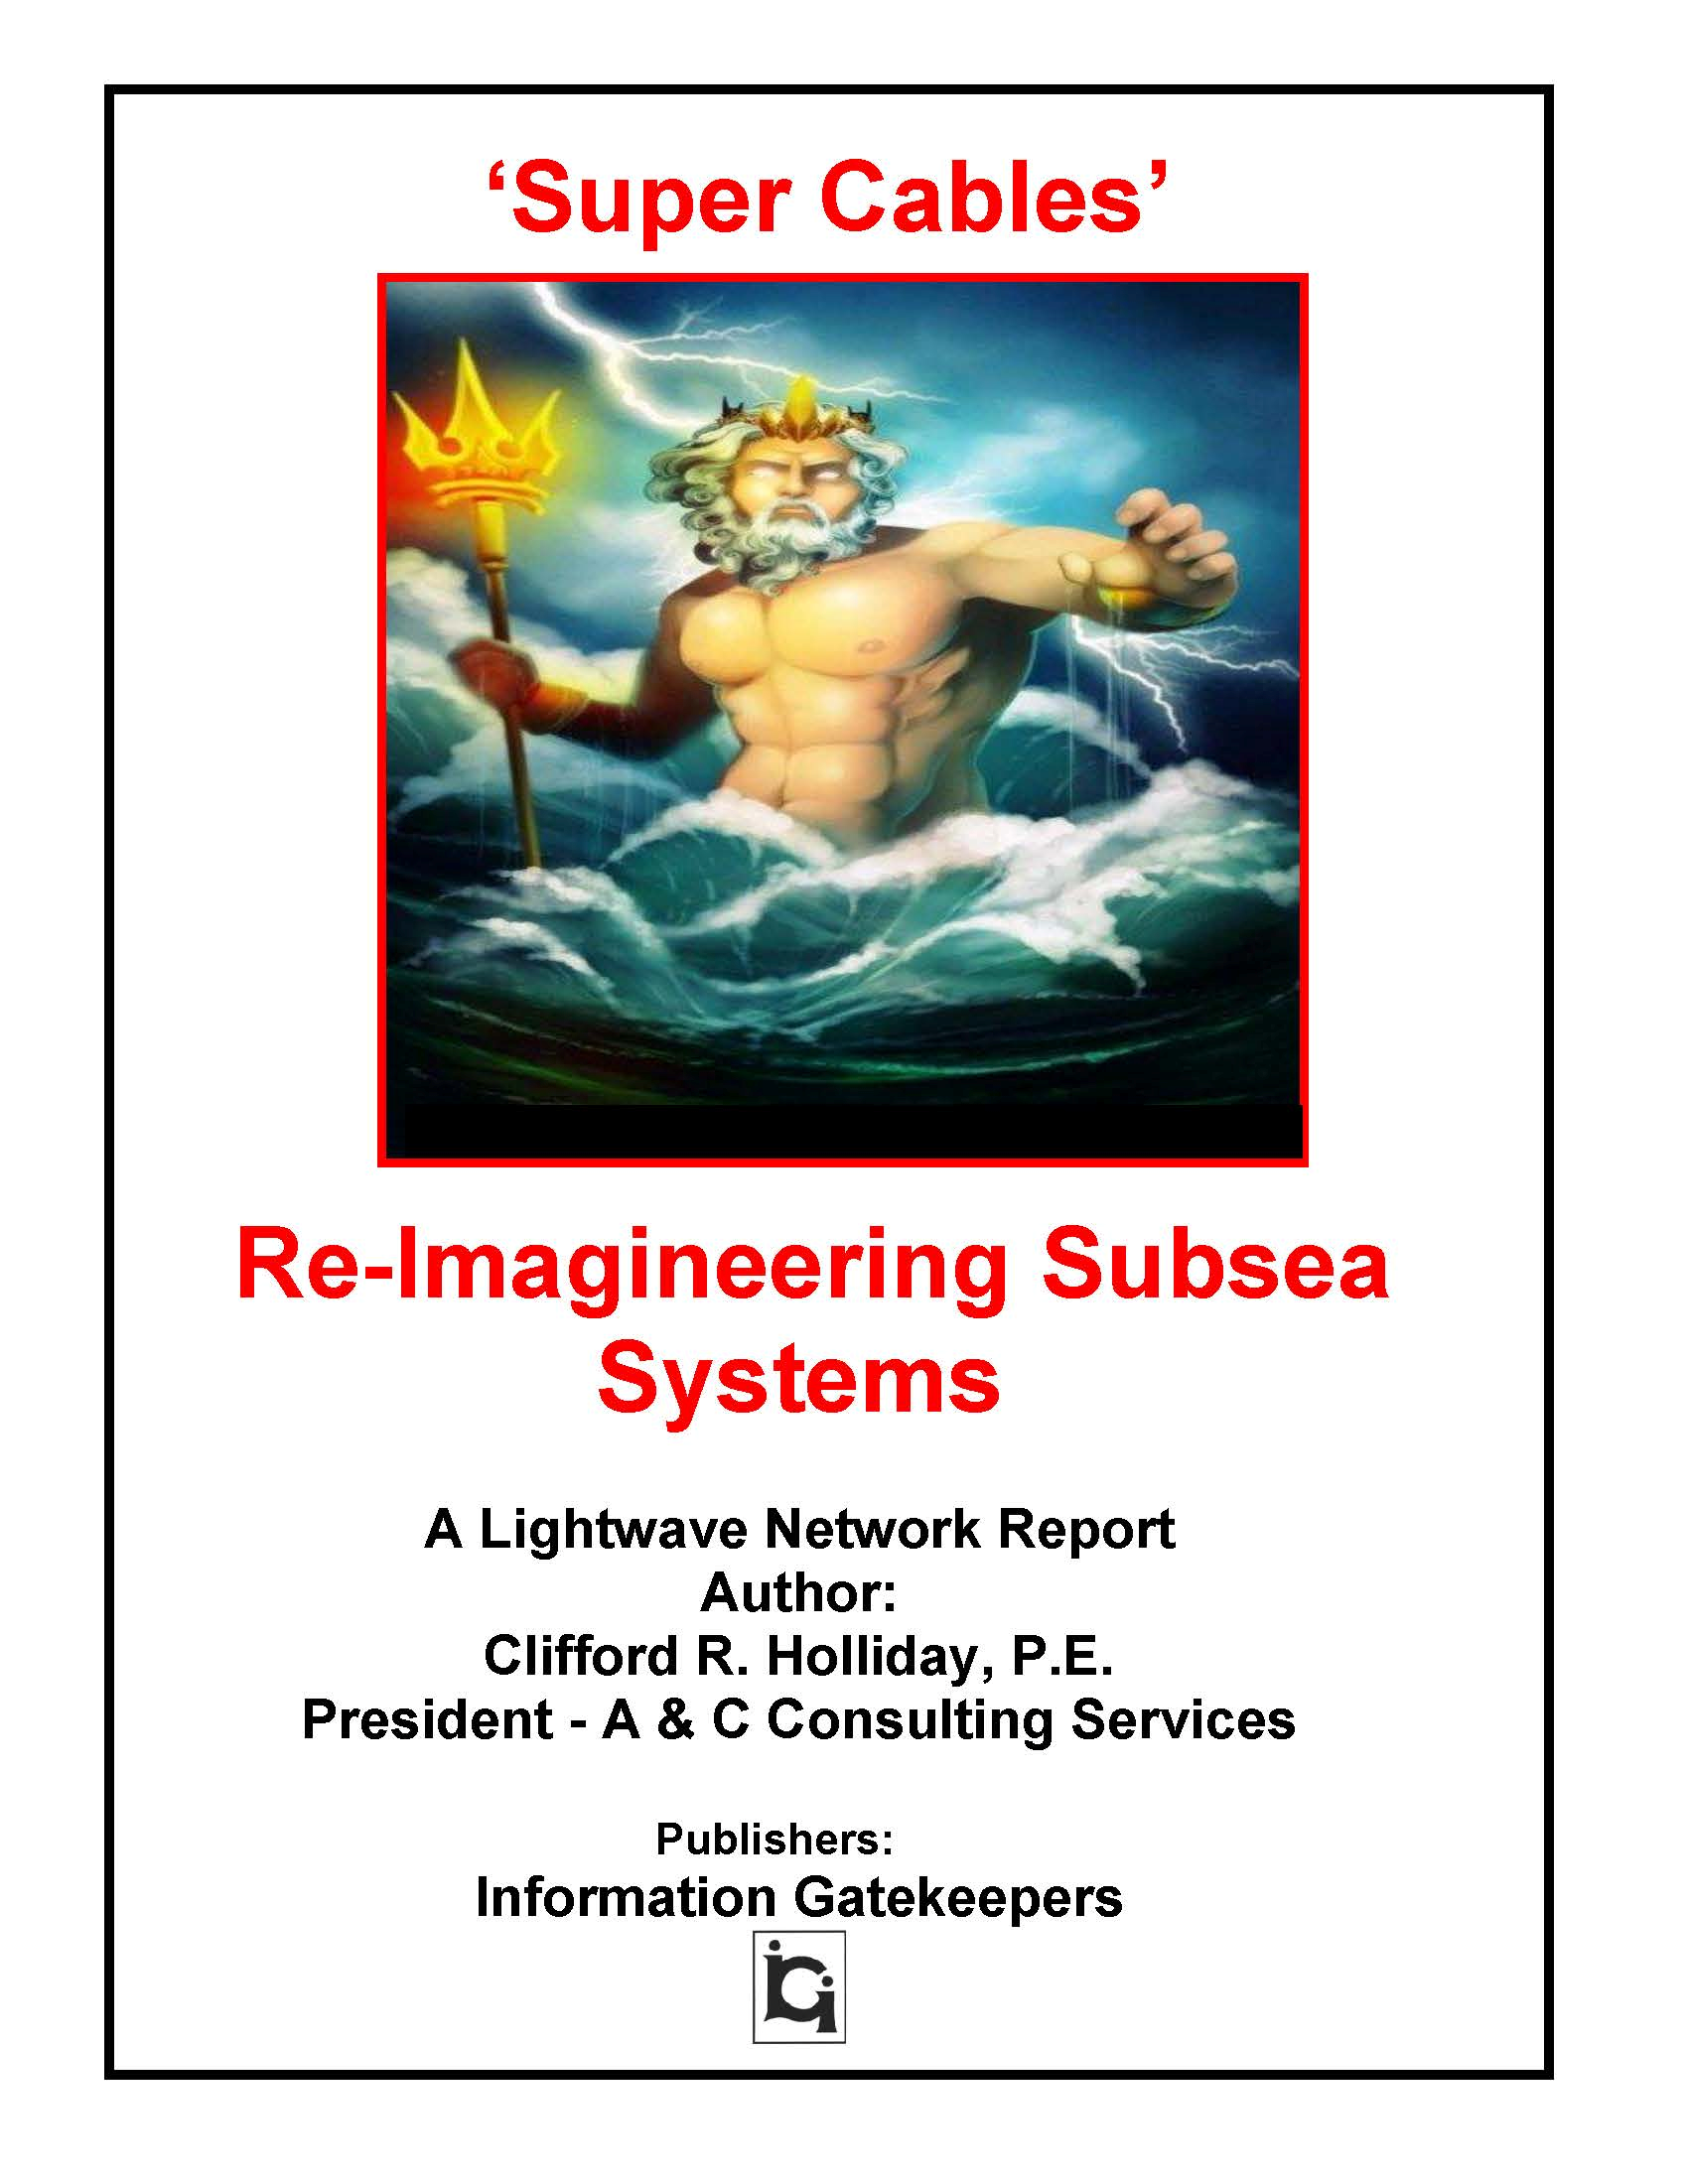 Super Cables Re-Imagineering Subsea Systems